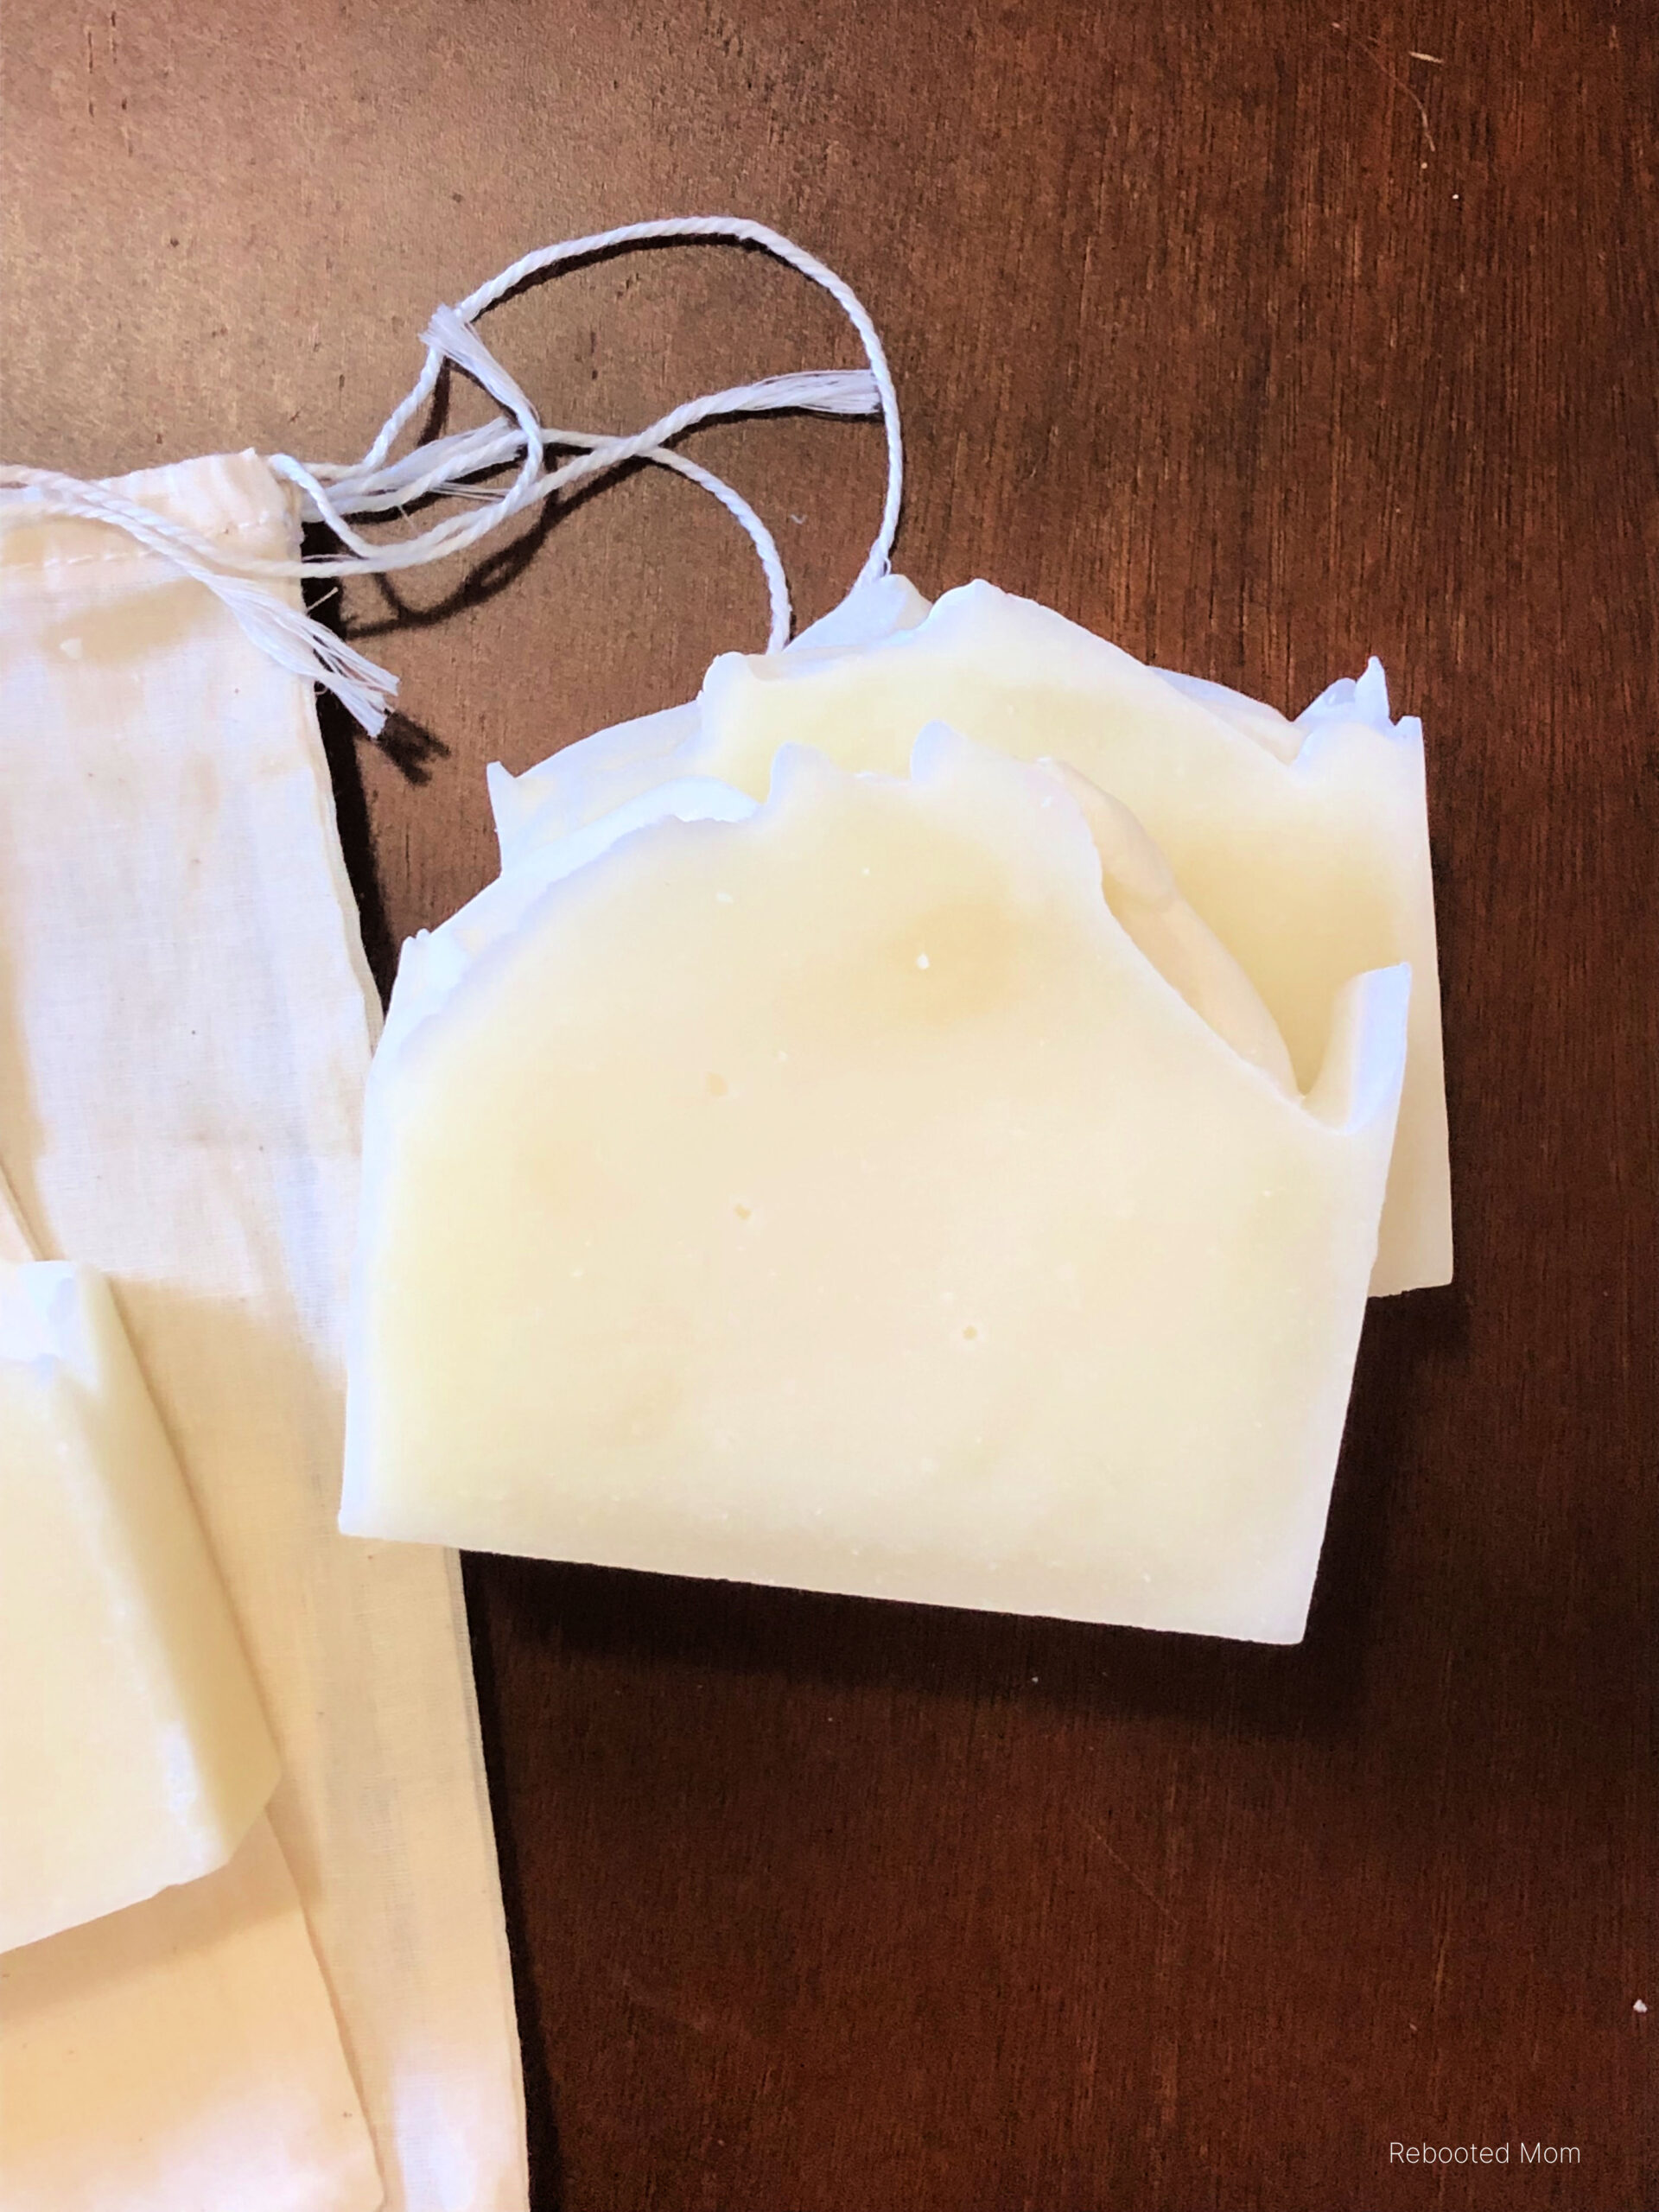 Pure Tallow Soap is a simple soap that is made with 100% rendered tallow. This simple soap is gentle on even the most sensitive of skin!